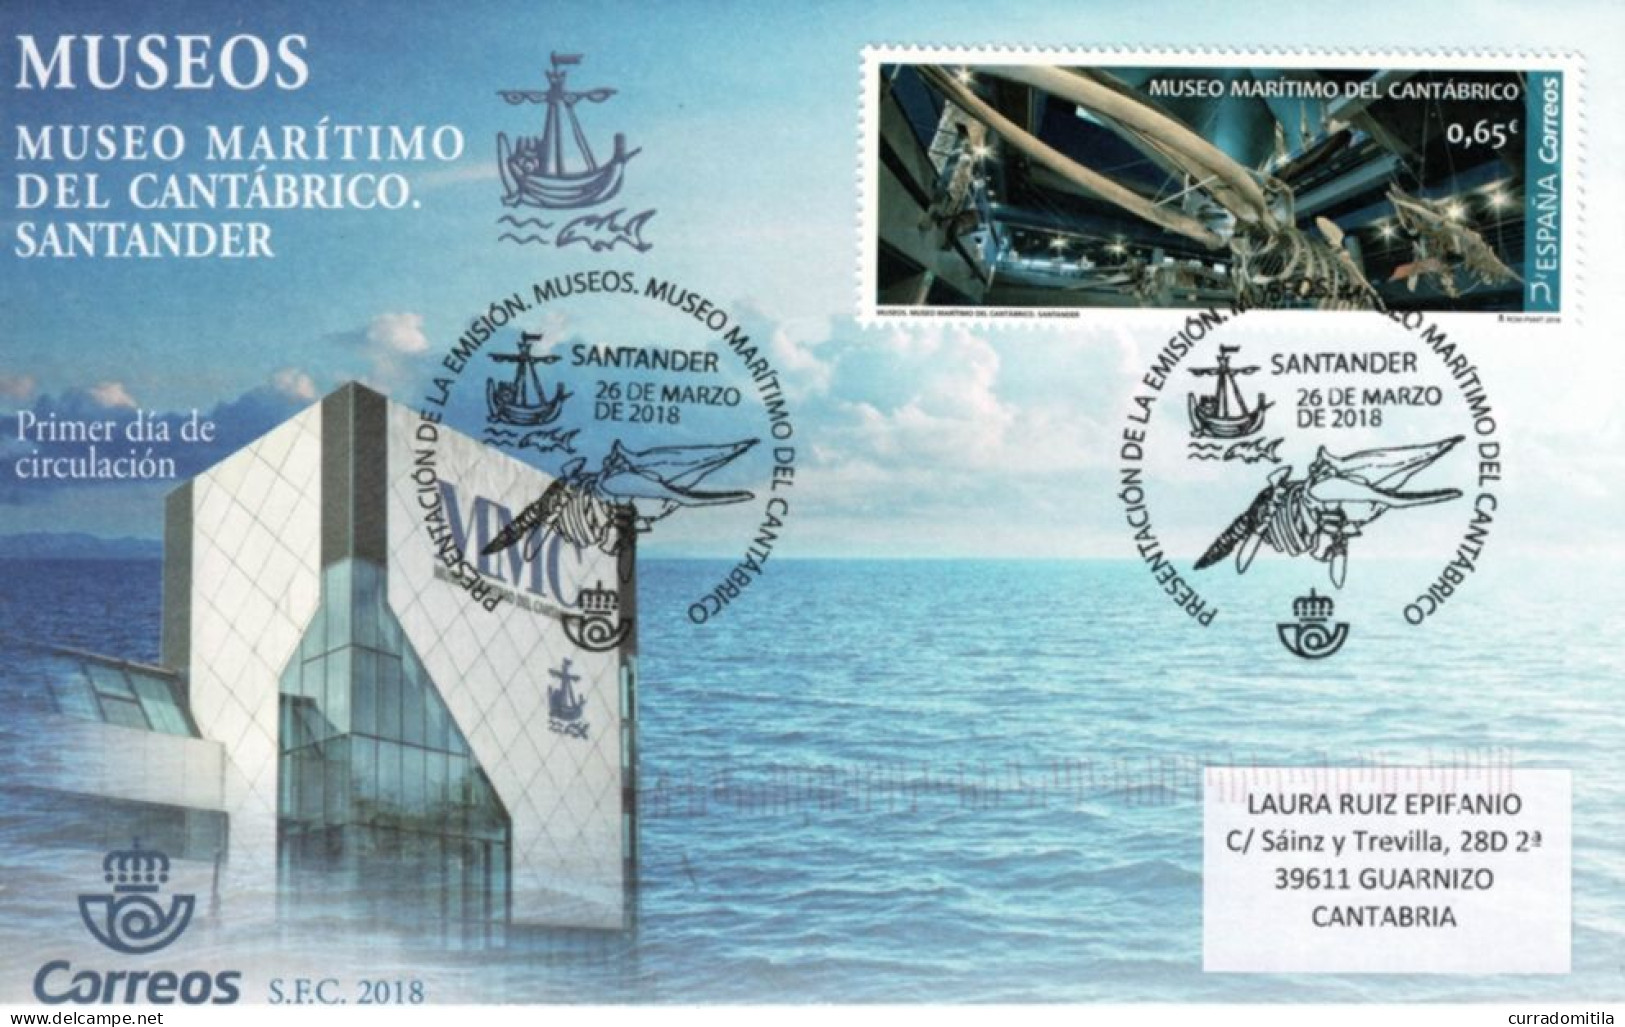 SPAIN. Circulated FDC From Santander With Maritime Museum Of Santander. Skeleton Of A Whale. Presentation Cachet - Whales